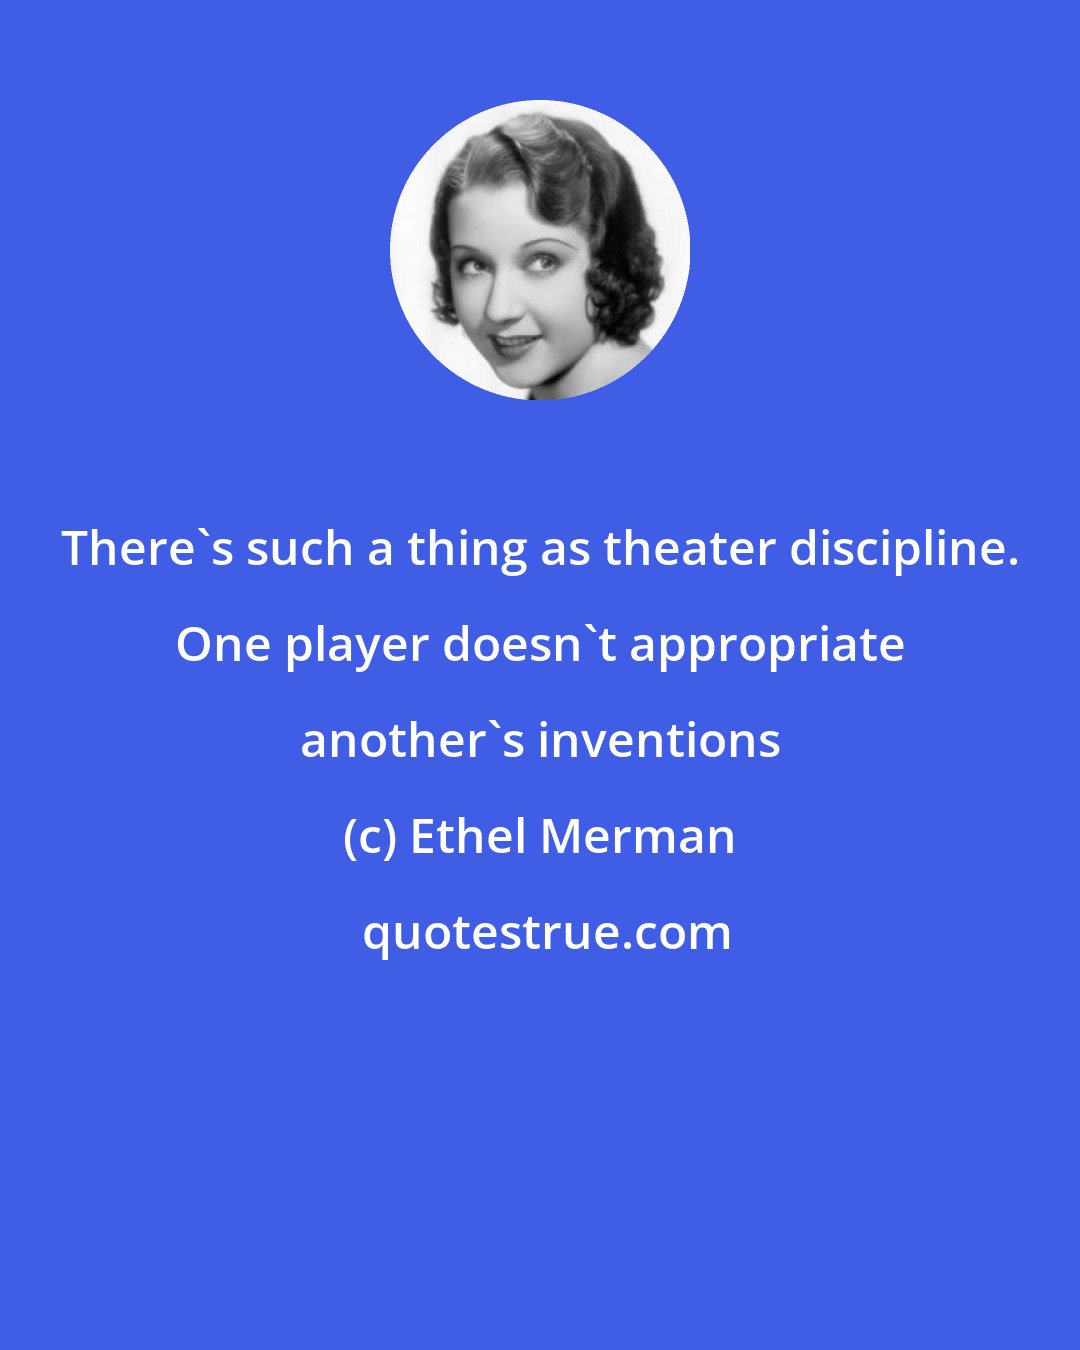 Ethel Merman: There's such a thing as theater discipline. One player doesn't appropriate another's inventions